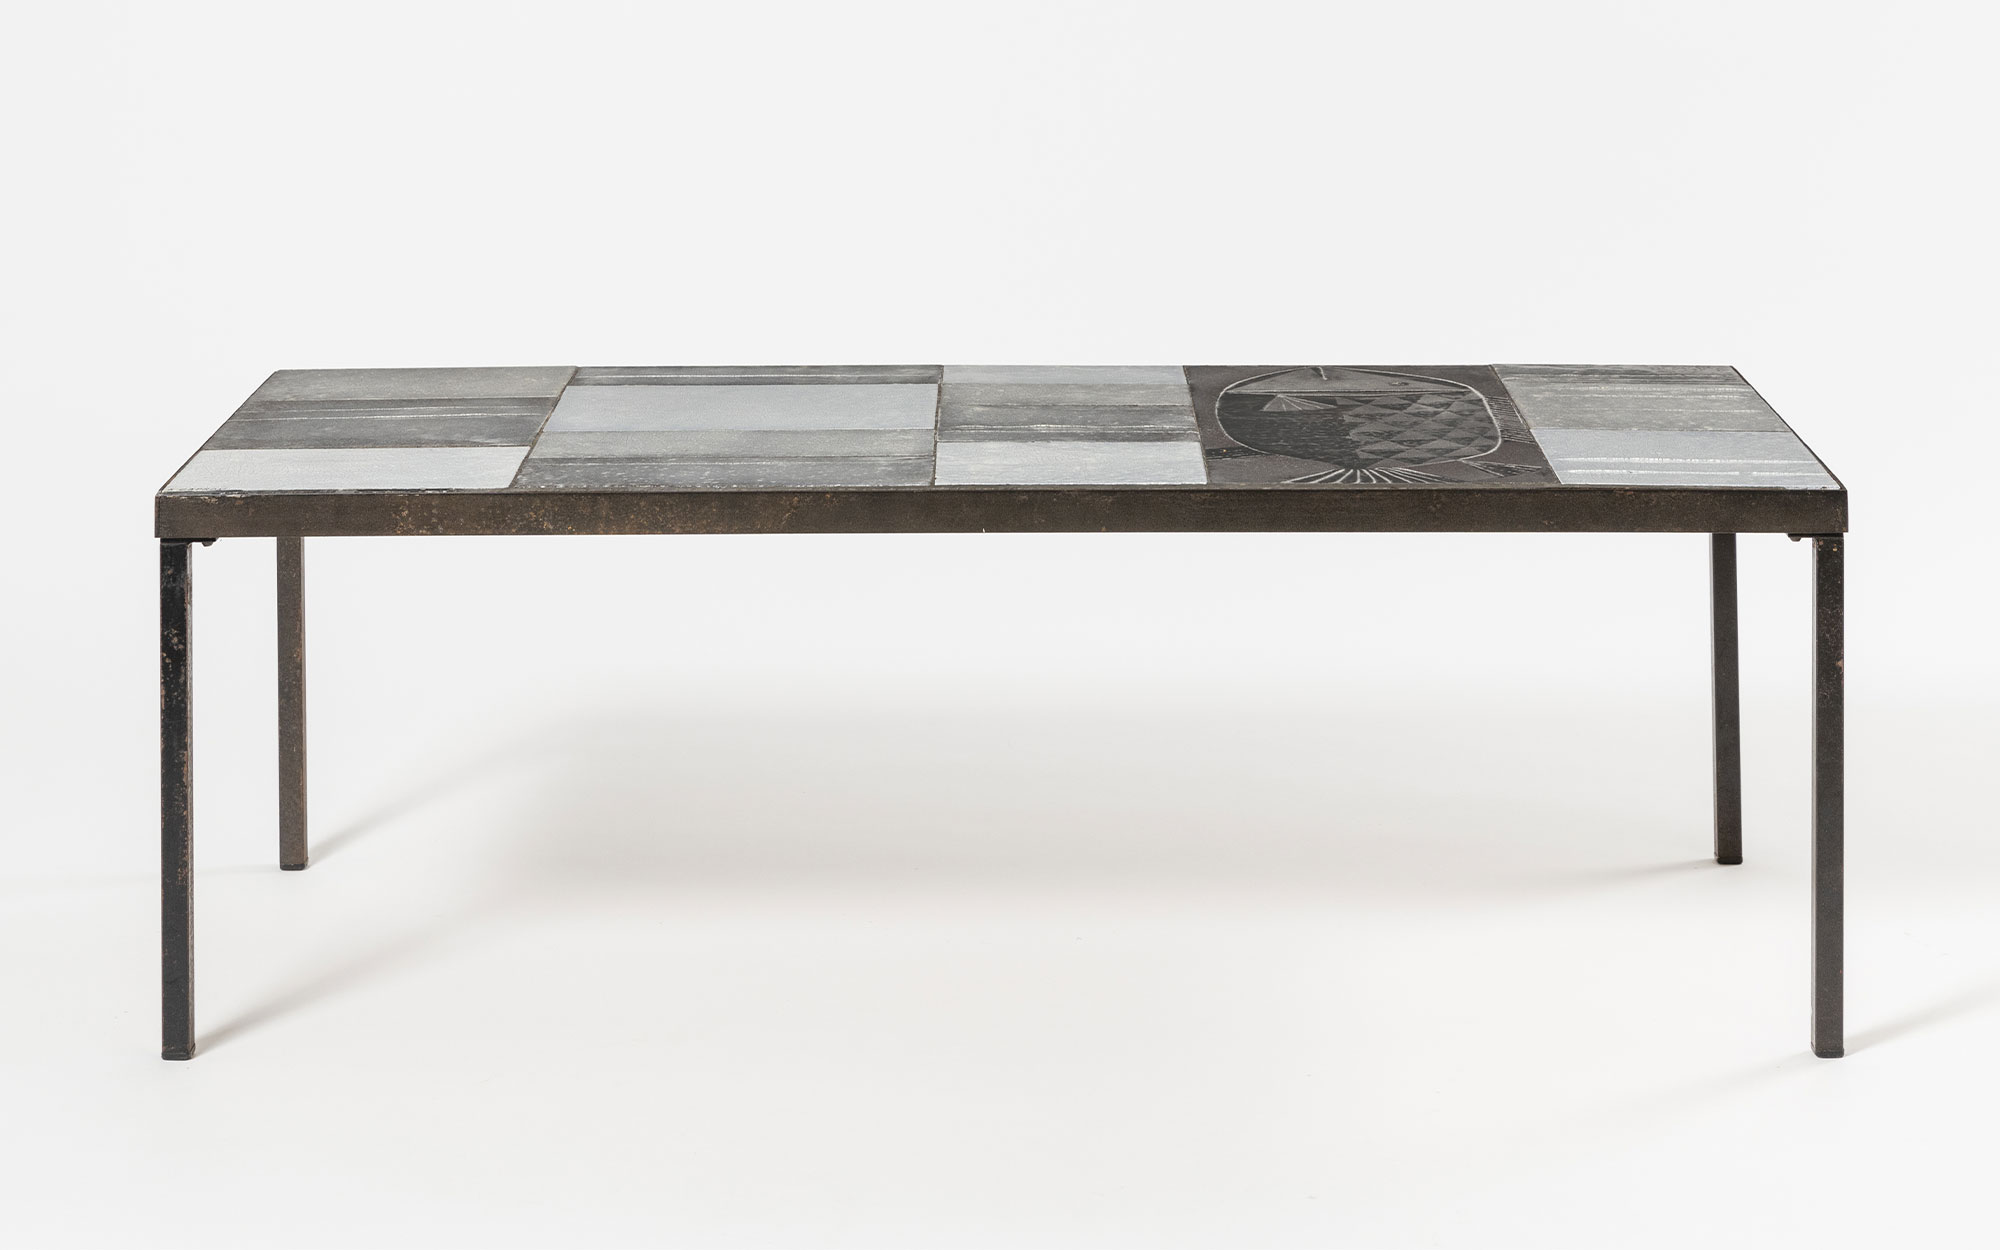 Tabe basse Poisson - Roger Capron - coffee-table table- Galerie kreo